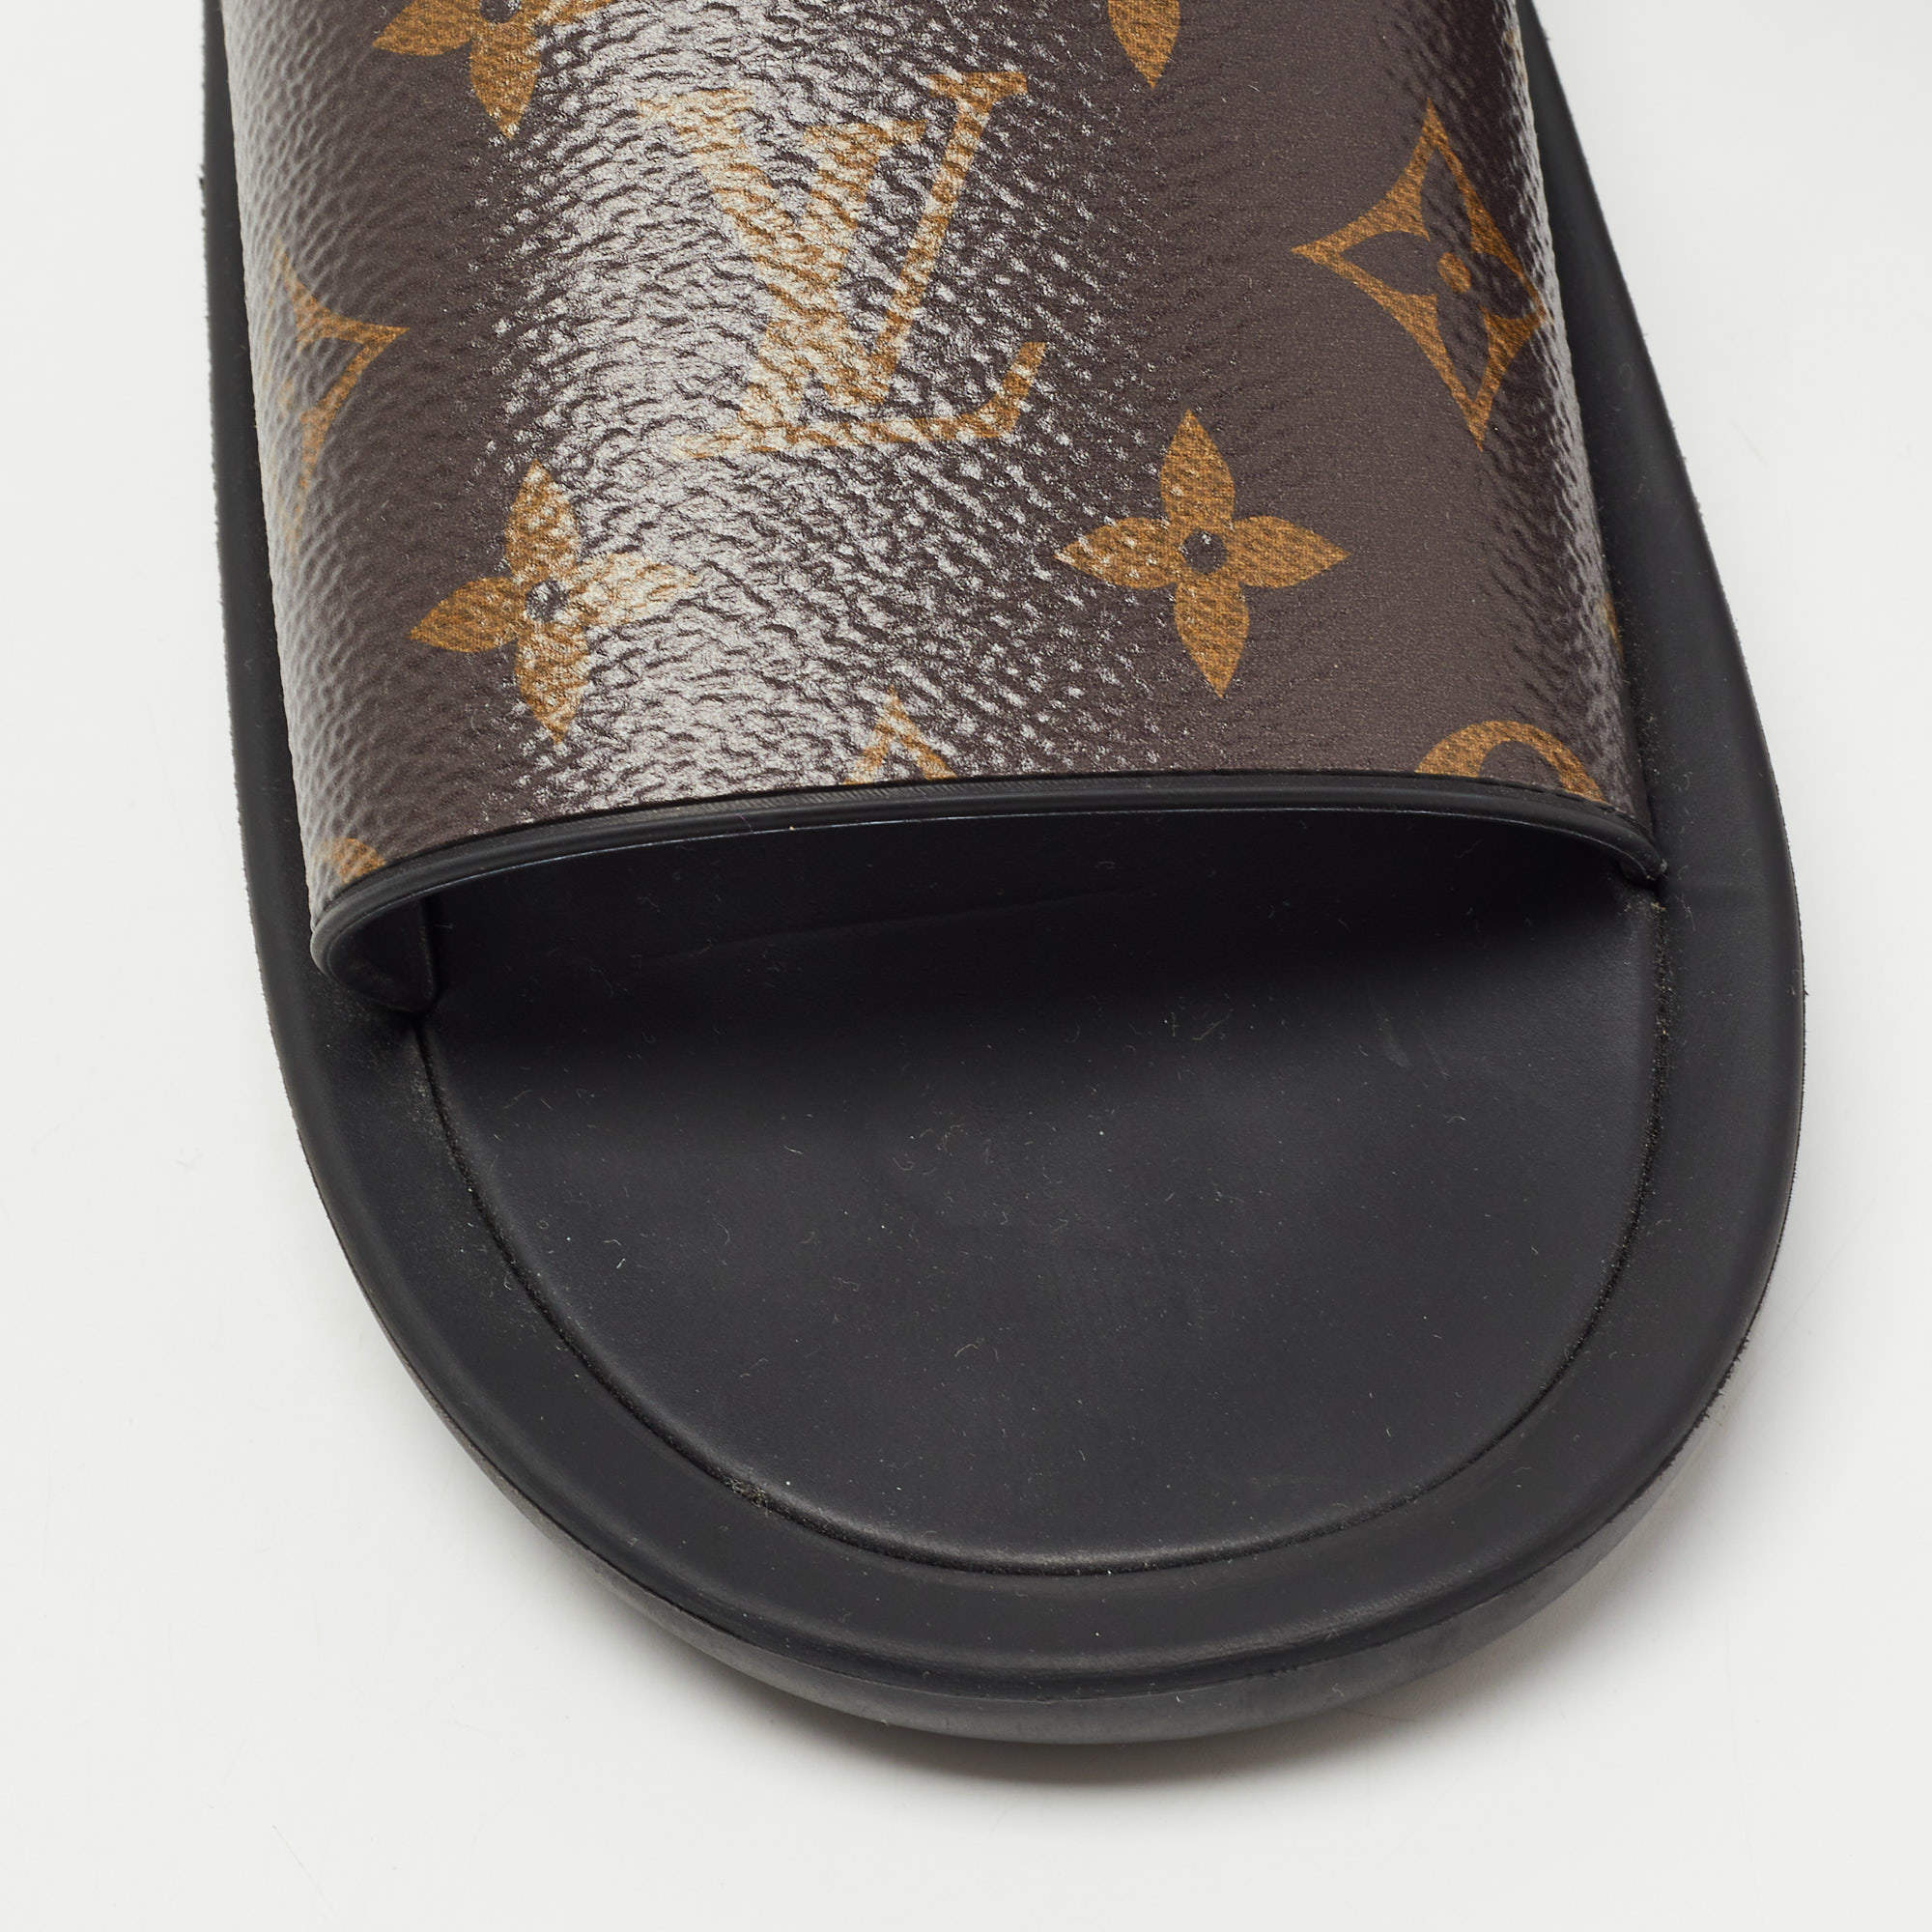 Louis Vuitton Brown Leather and Monogram Canvas Slide Sandals Size 36